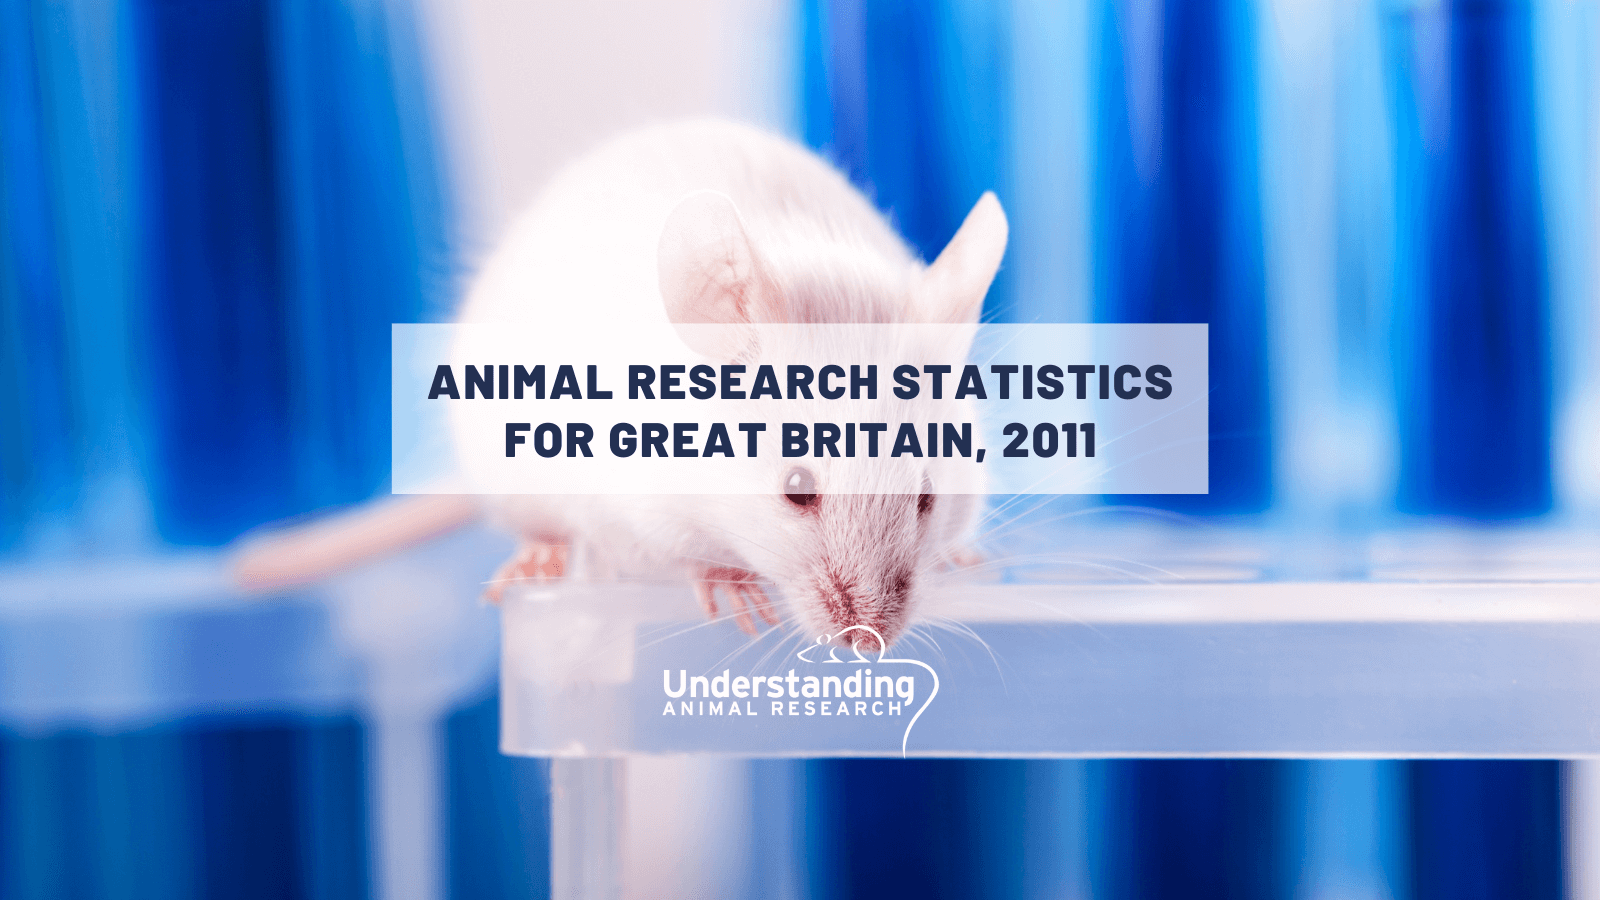 Animal research statistics for Great Britain, 2011